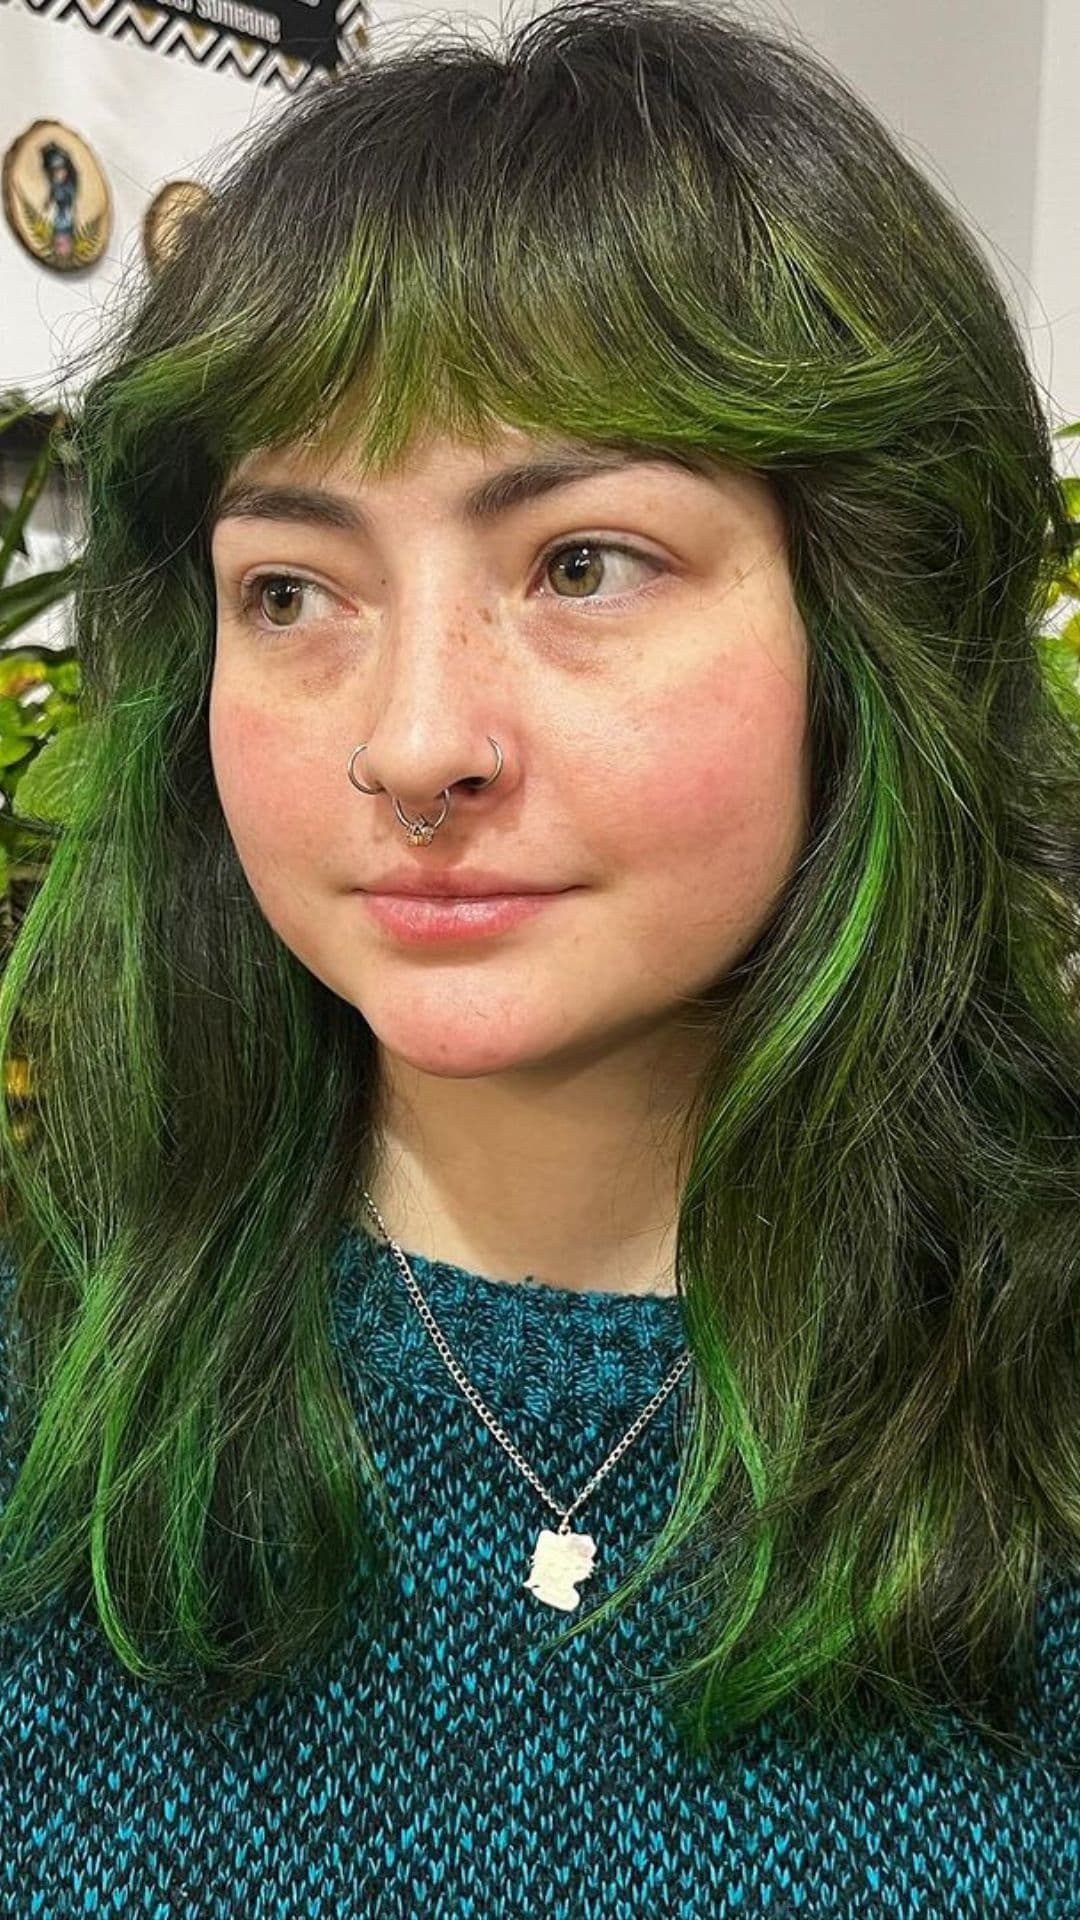 A woman modelling a green shag with brow-length bangs hairstyle.